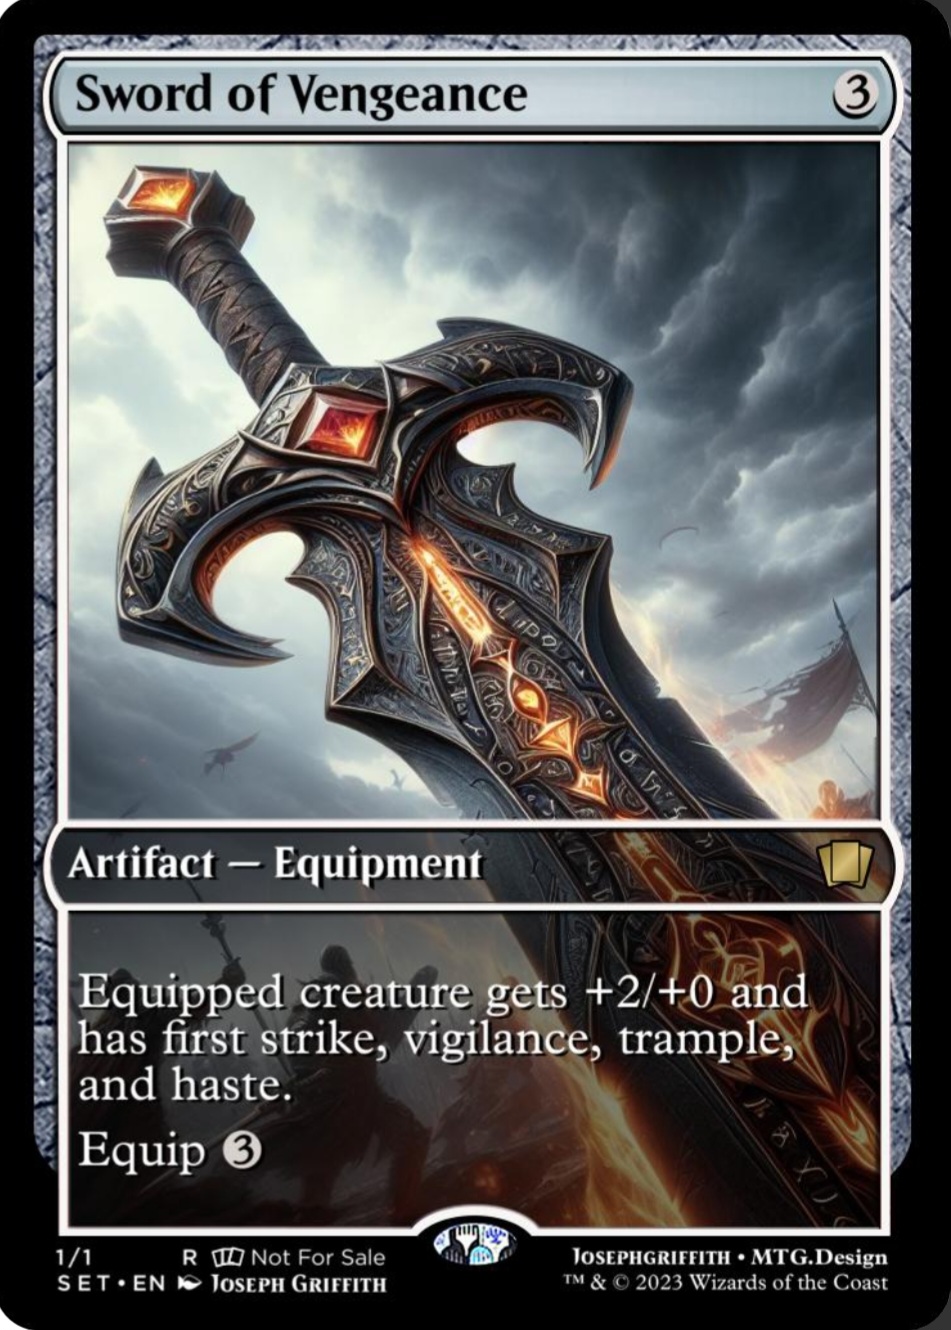 Sword of Vengeance feature for Tonys deck